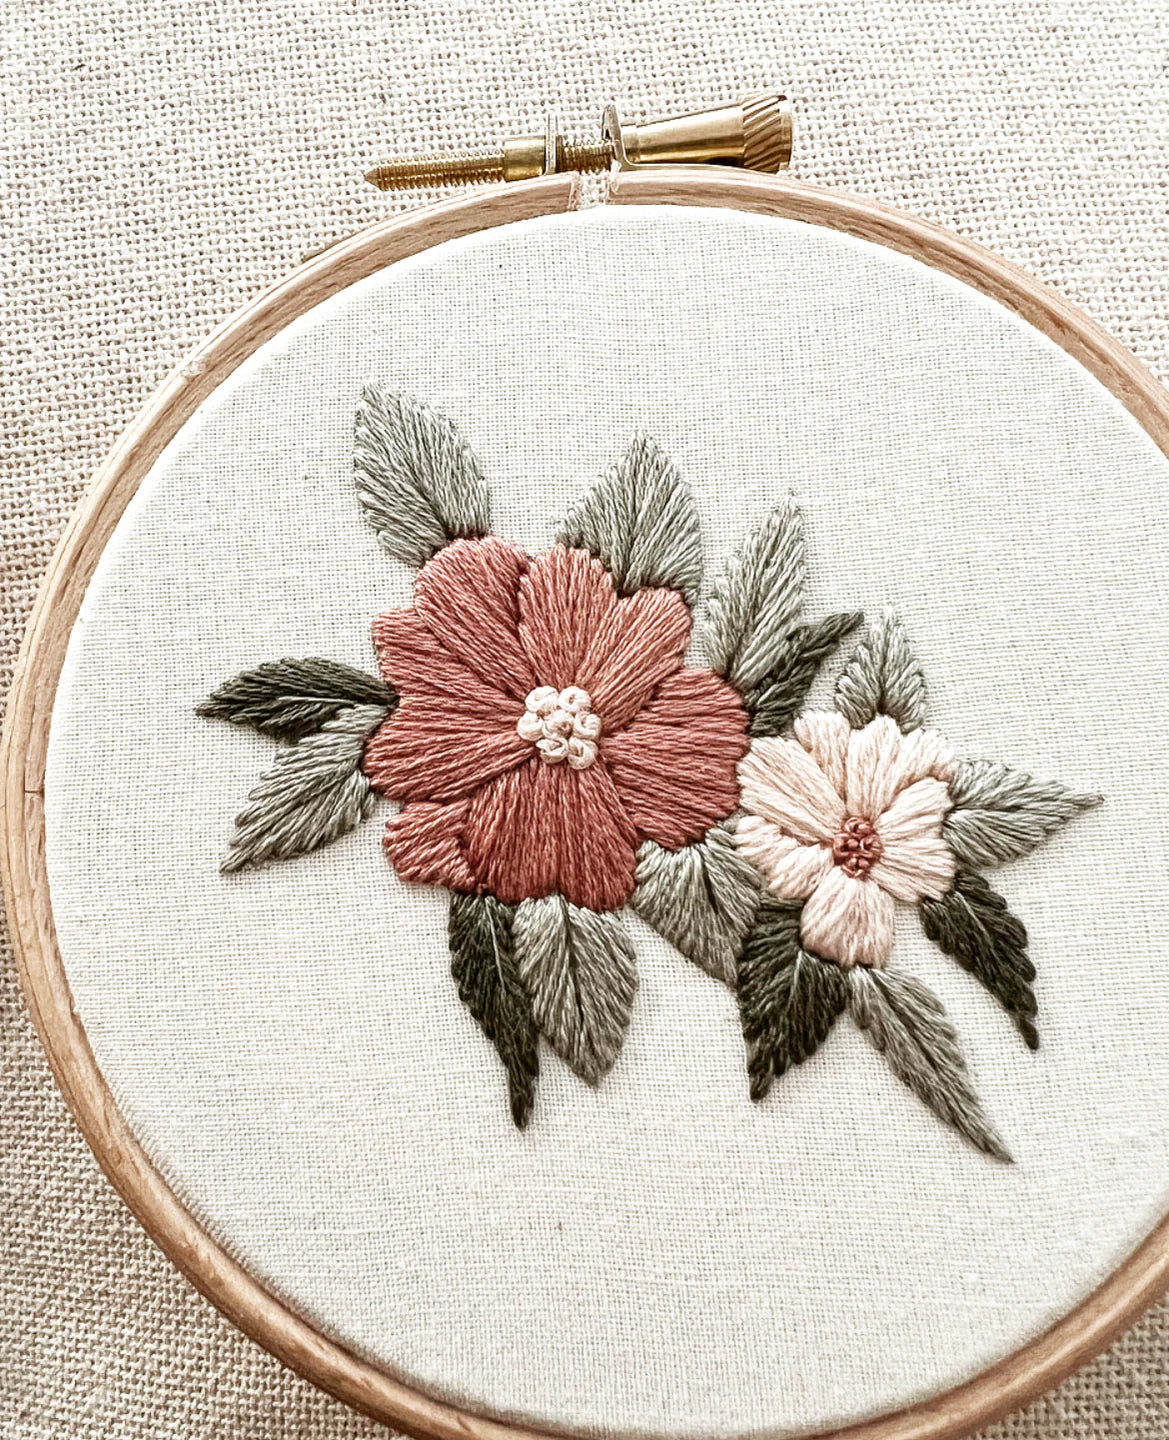 Whimsical Florals Embroidery Kit in Multi